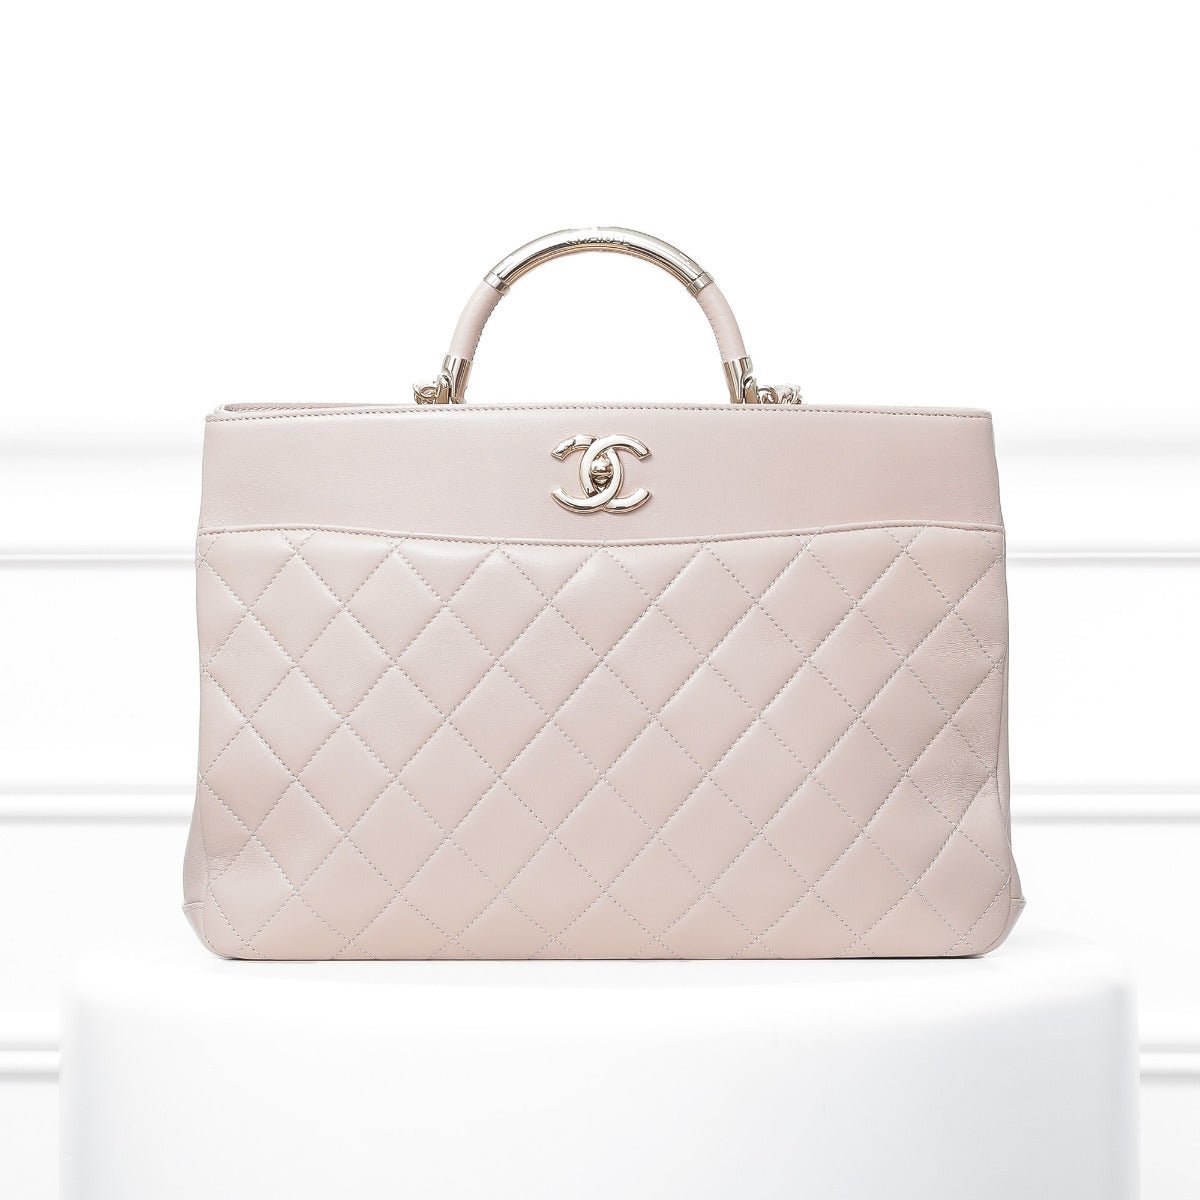 The Closet - Chanel Beige Carry Chic Shopping Bag | The Closet